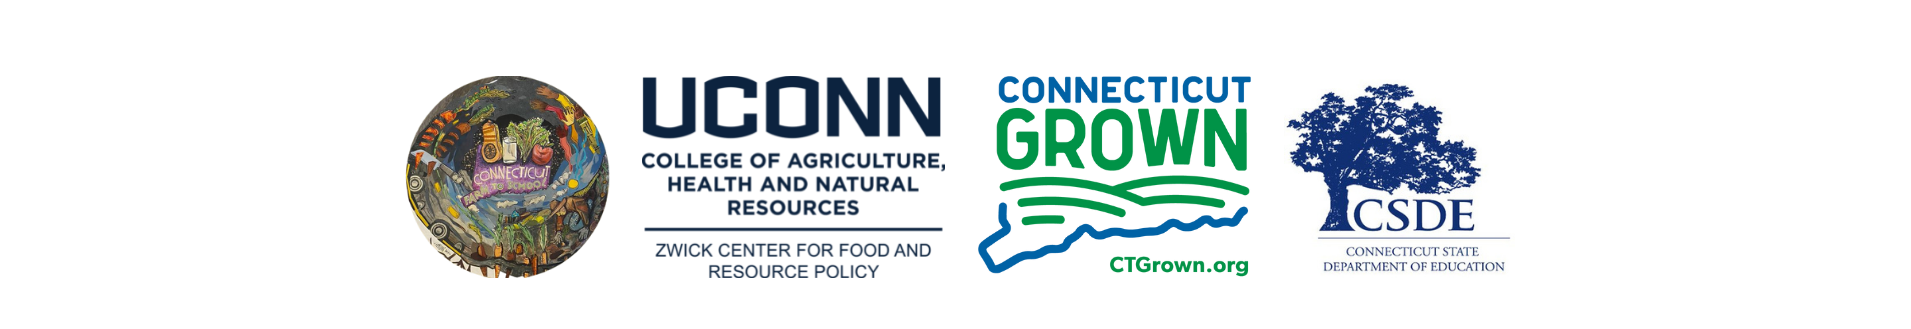 Logos of: CT Farm to School Collaborative, UConn Zwick Center, CT Department of Agriculture, and CT State Department of Education Logo